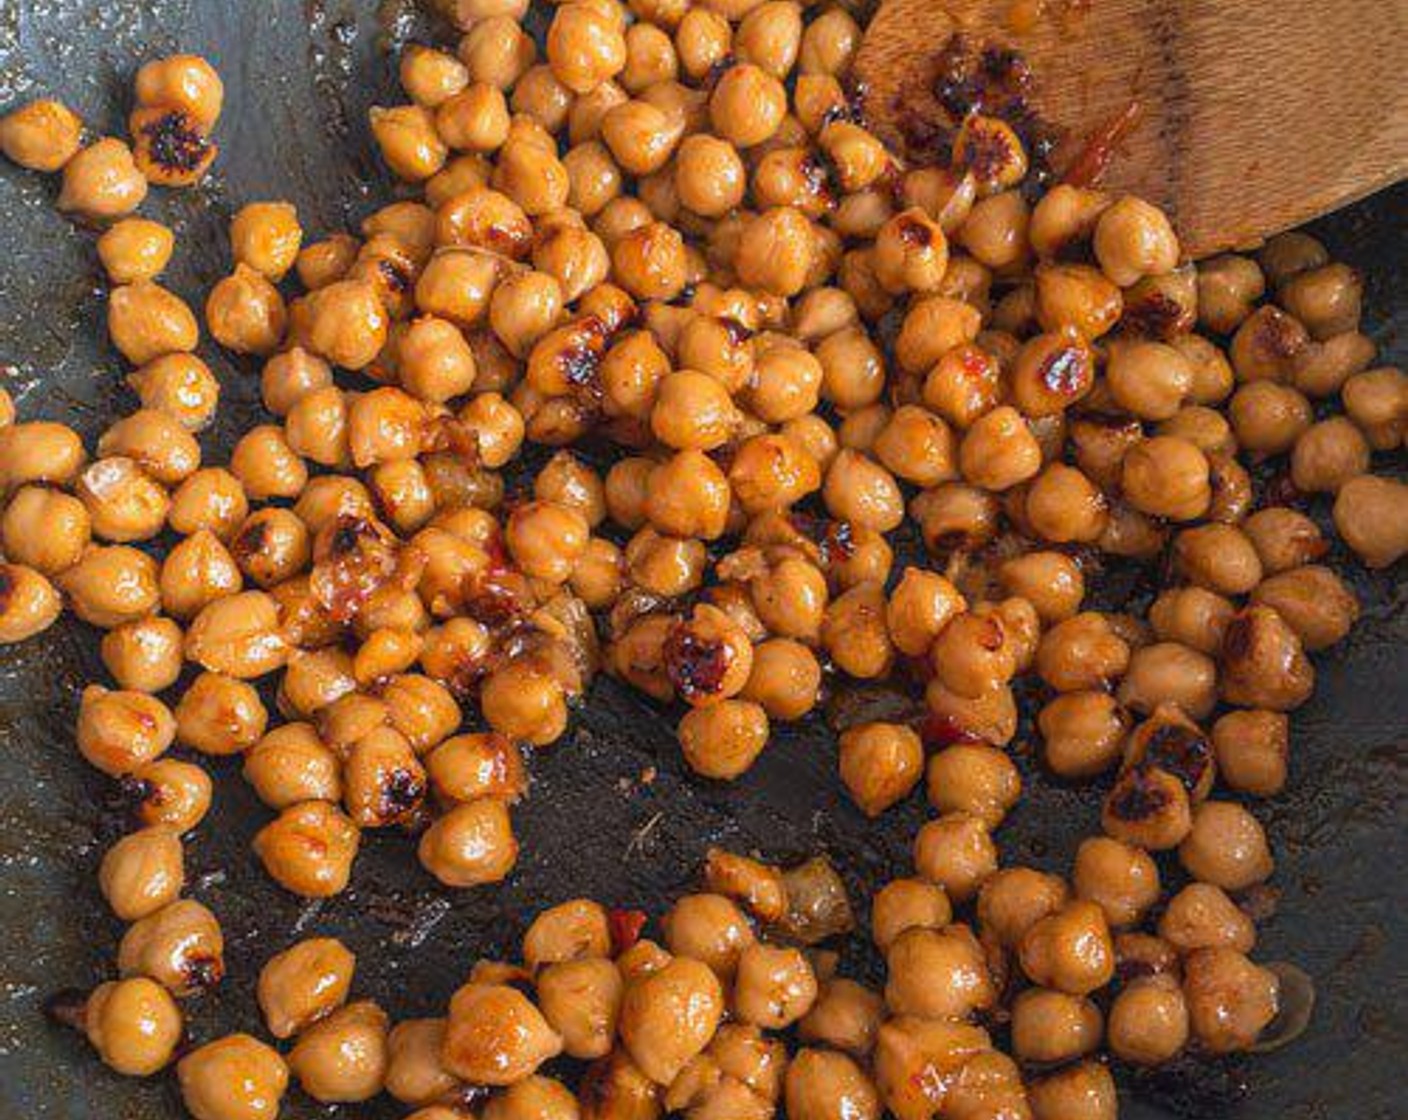 step 2 In an extra large frying pan or wok, add Grapeseed Oil (1 Tbsp), Chickpeas (1 can), and Mango Ginger Chutney (1/3 cup). Cook covered on medium-high for about 5 minutes, stirring about every minute. Chickpeas should be slightly charred. Push to the side of the pan.